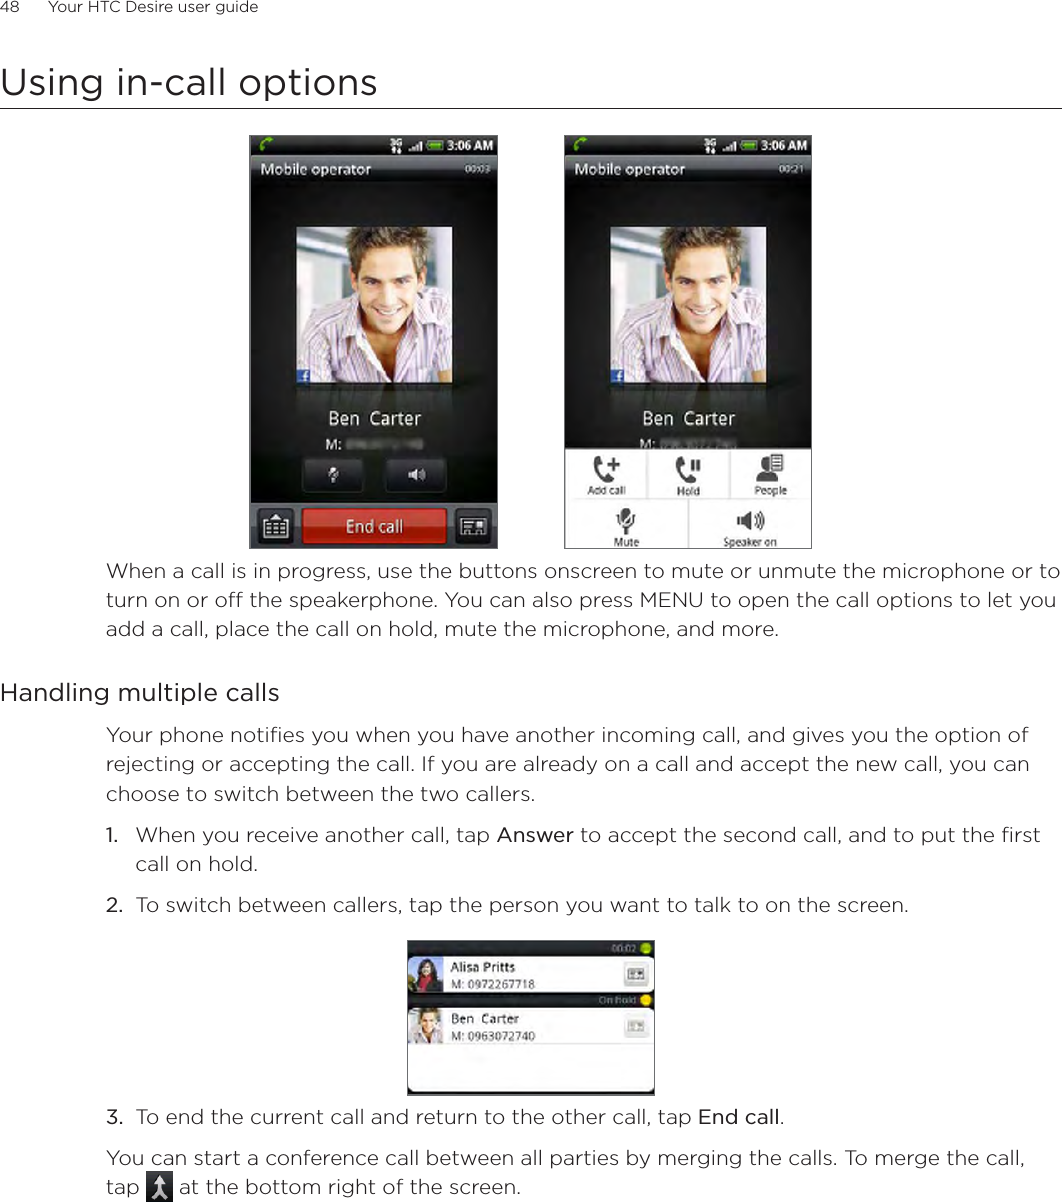 48      Your HTC Desire user guide      Using in-call optionsWhen a call is in progress, use the buttons onscreen to mute or unmute the microphone or to turn on or off the speakerphone. You can also press MENU to open the call options to let you add a call, place the call on hold, mute the microphone, and more.Handling multiple callsYour phone notifies you when you have another incoming call, and gives you the option of rejecting or accepting the call. If you are already on a call and accept the new call, you can choose to switch between the two callers.1. When you receive another call, tap Answer to accept the second call, and to put the first call on hold.2. To switch between callers, tap the person you want to talk to on the screen.3. To end the current call and return to the other call, tap End call.You can start a conference call between all parties by merging the calls. To merge the call, tap  at the bottom right of the screen.